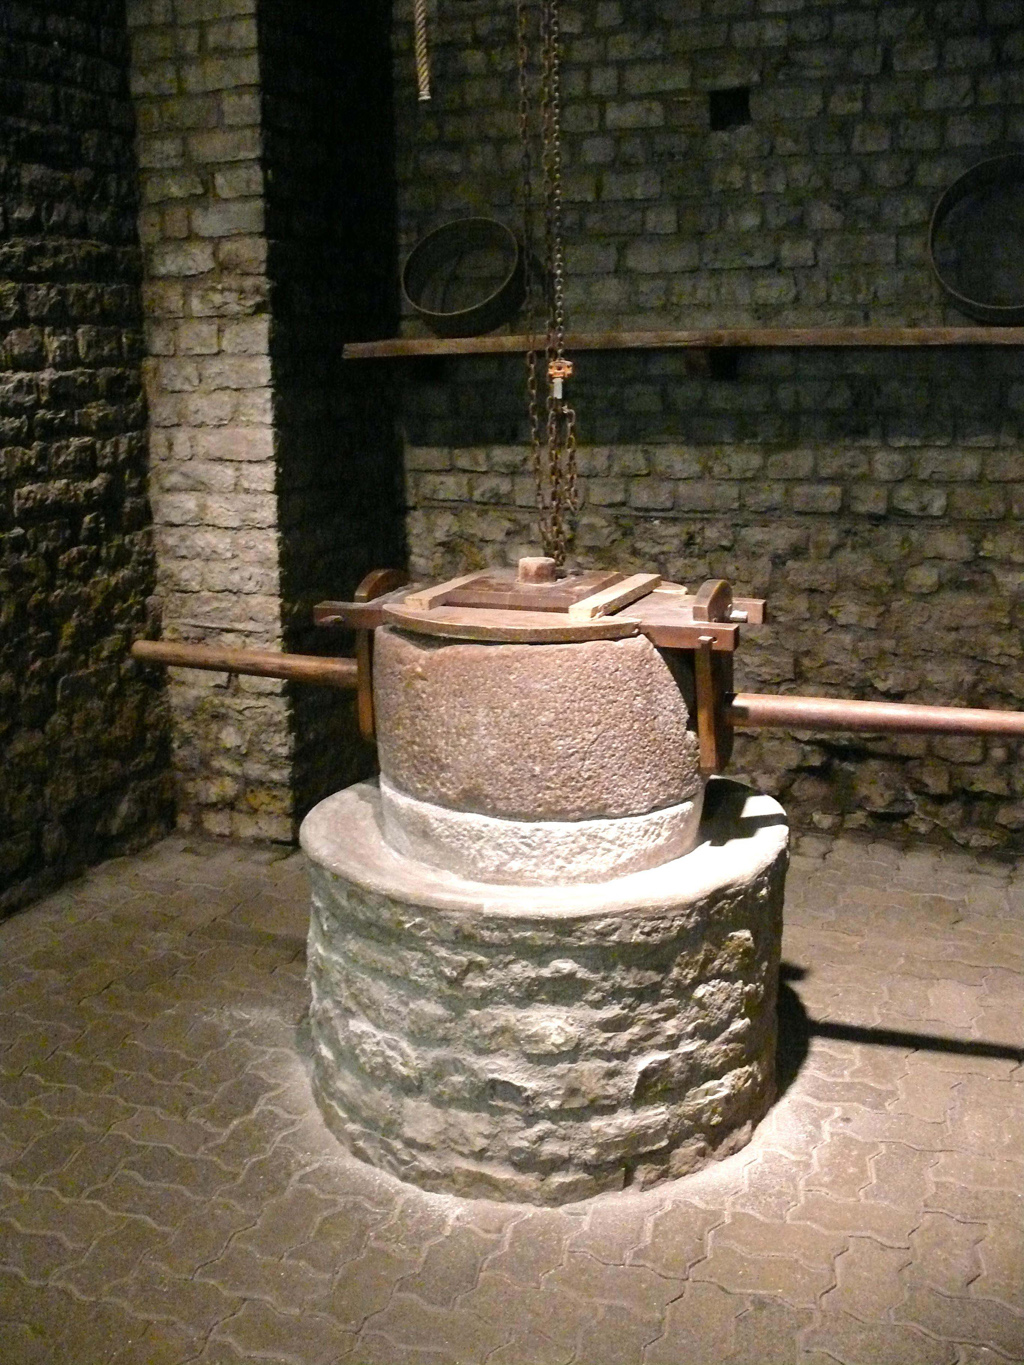 Stone mill for grinding wheat in the open air museum of Augusta Raurica.